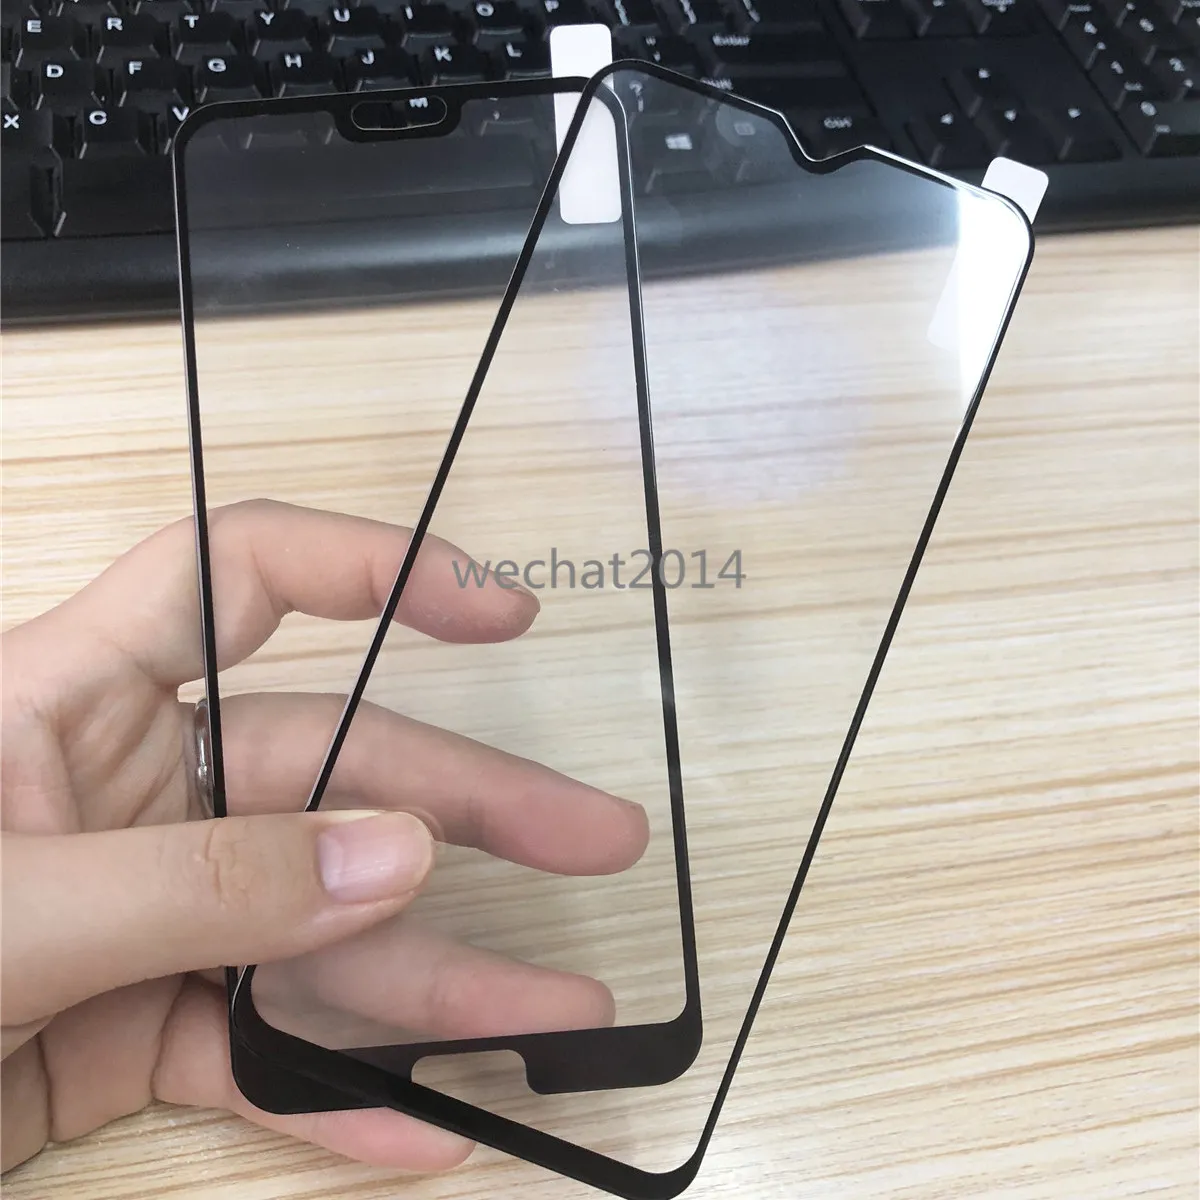 Wholesale 100pcs 2.5D Full Glue Tempered Glass For Samsung A70 A60 A50 A40 A30 A20 A10 M30 M20 M10 for Hua wei Mate 10 20 pro P30 P20 P10